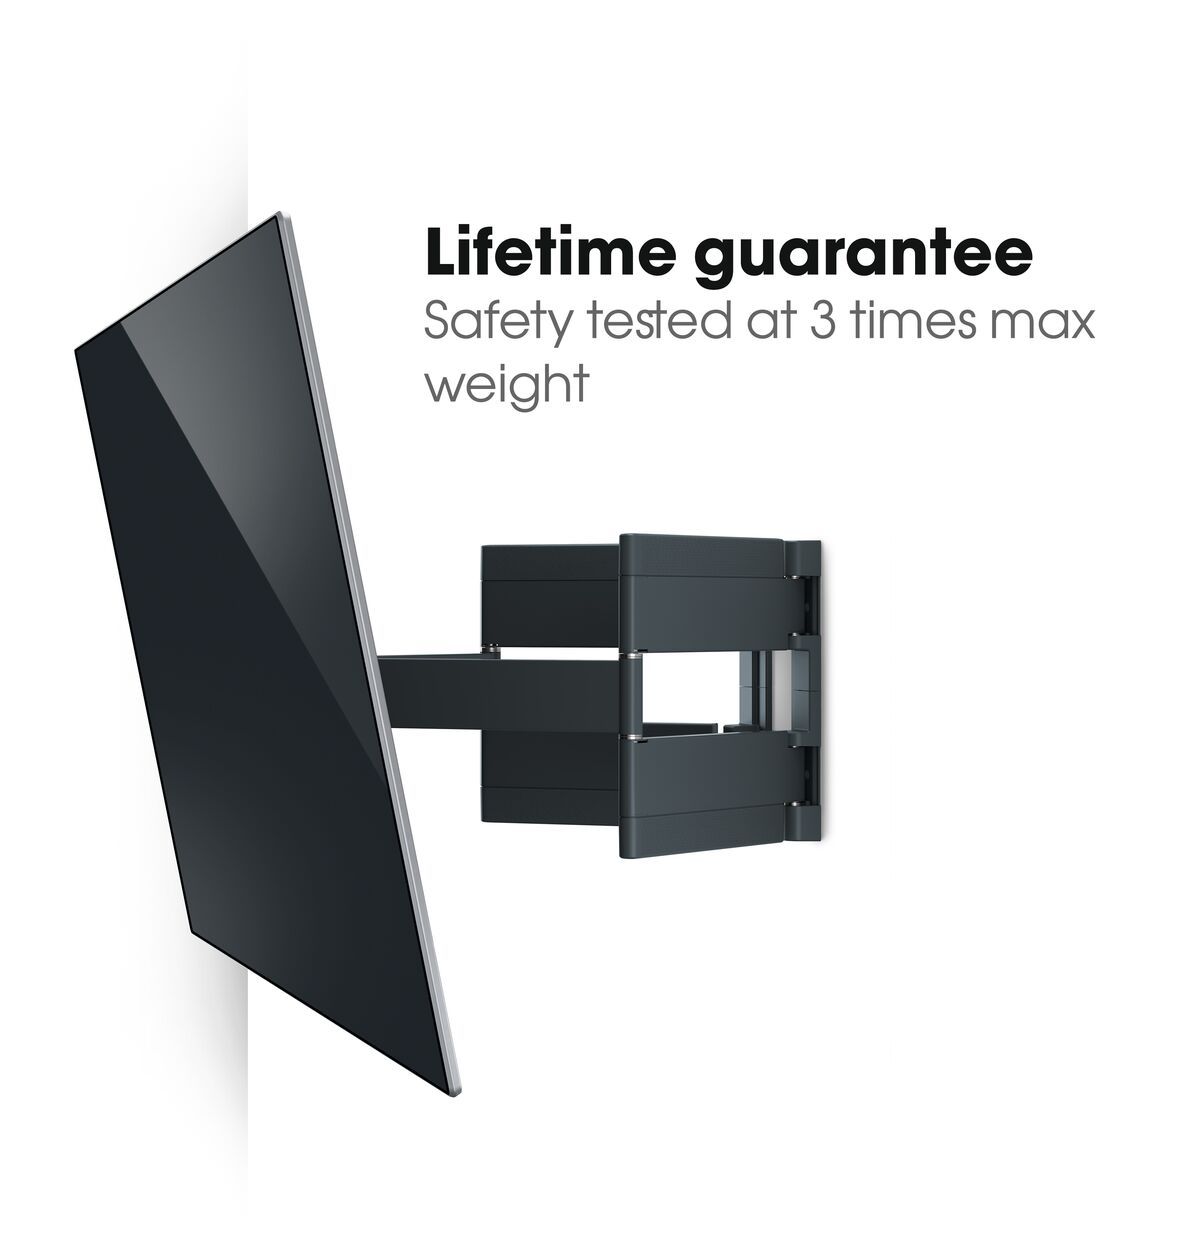 Vogel's THIN 550 ExtraThin Full-Motion TV Wall Mount - Suitable for 40 up to 100 inch TVs - Forward and turning motion (up to 120°) - Tilt up to 20° - USP